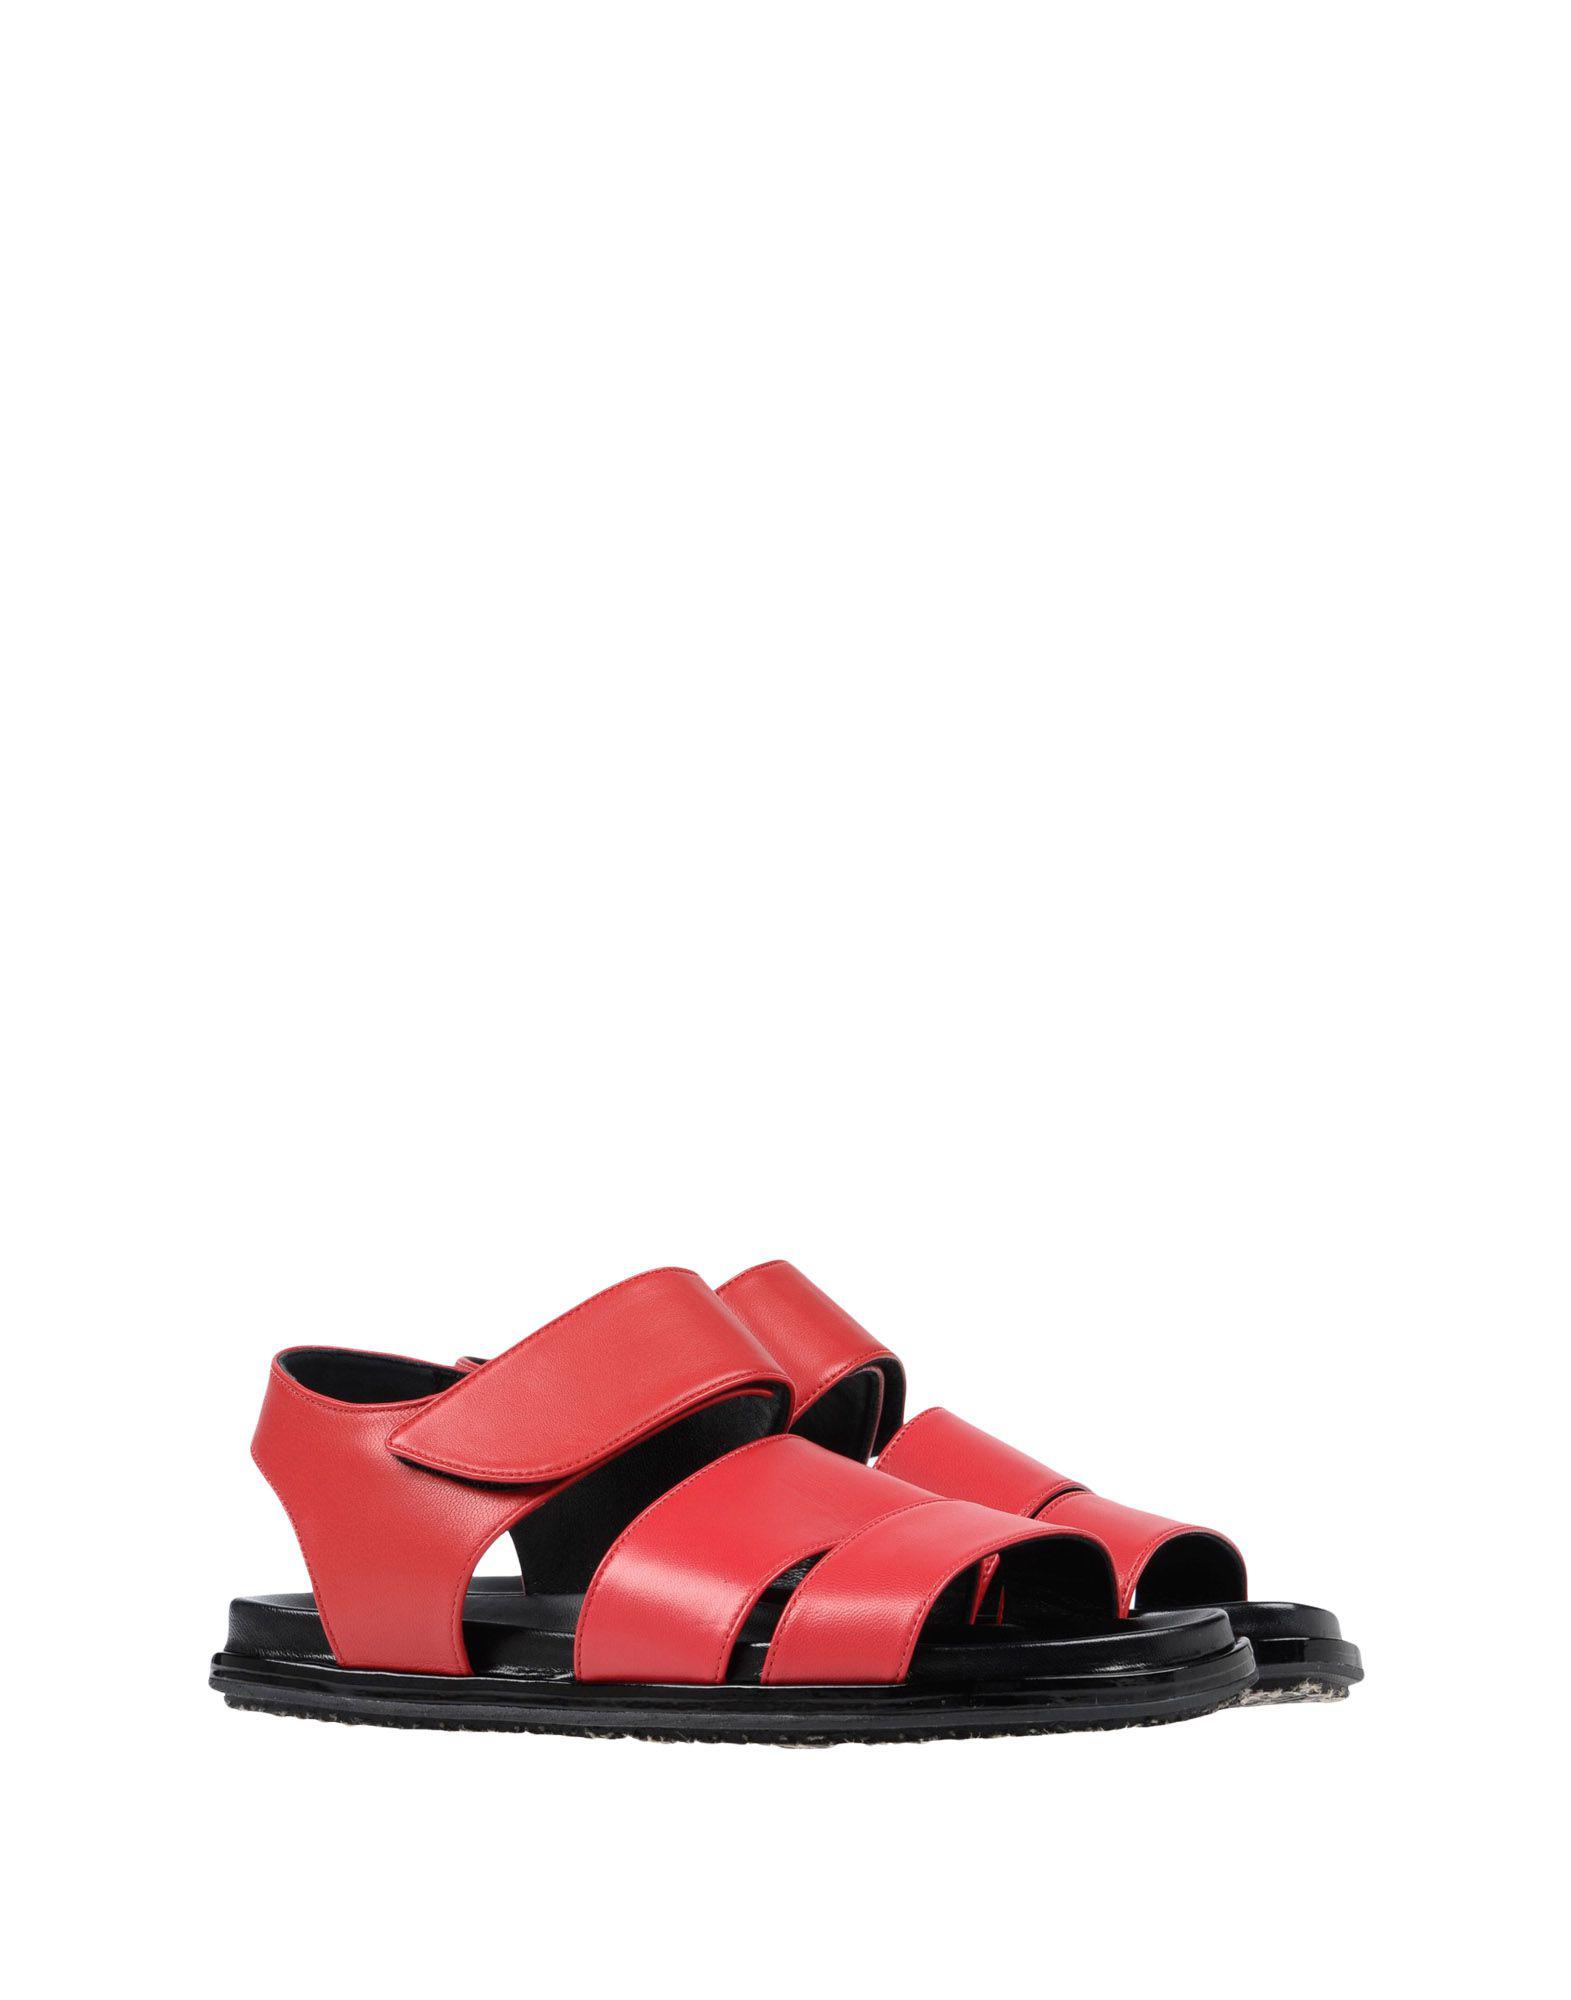 Marni Leather Sandals in Red - Lyst